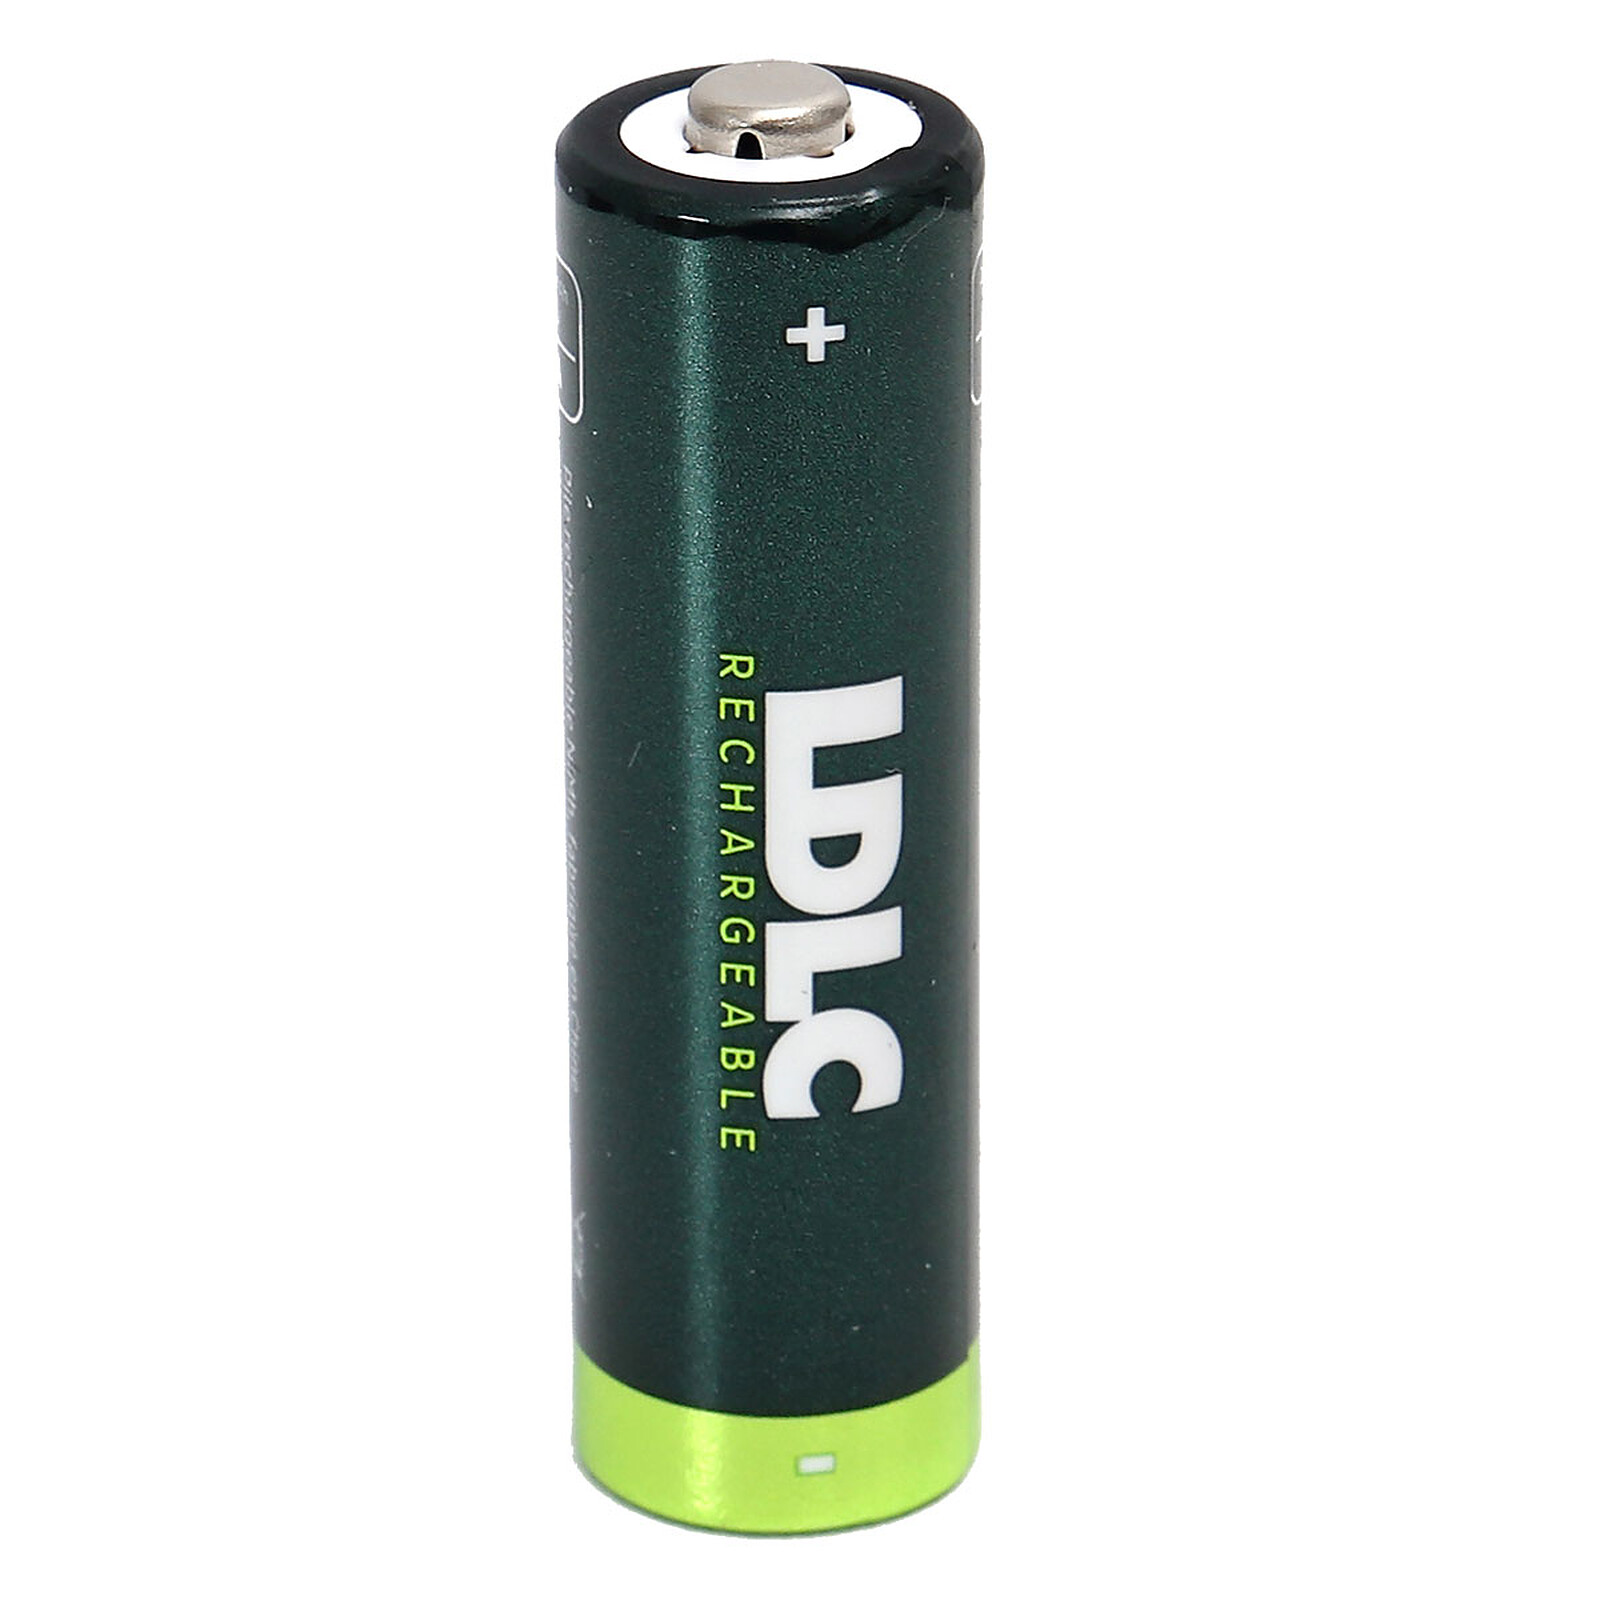 LDLC+ NiMH AA - 4 piles rechargeables AA (HR6) 2000 mAh - Pile